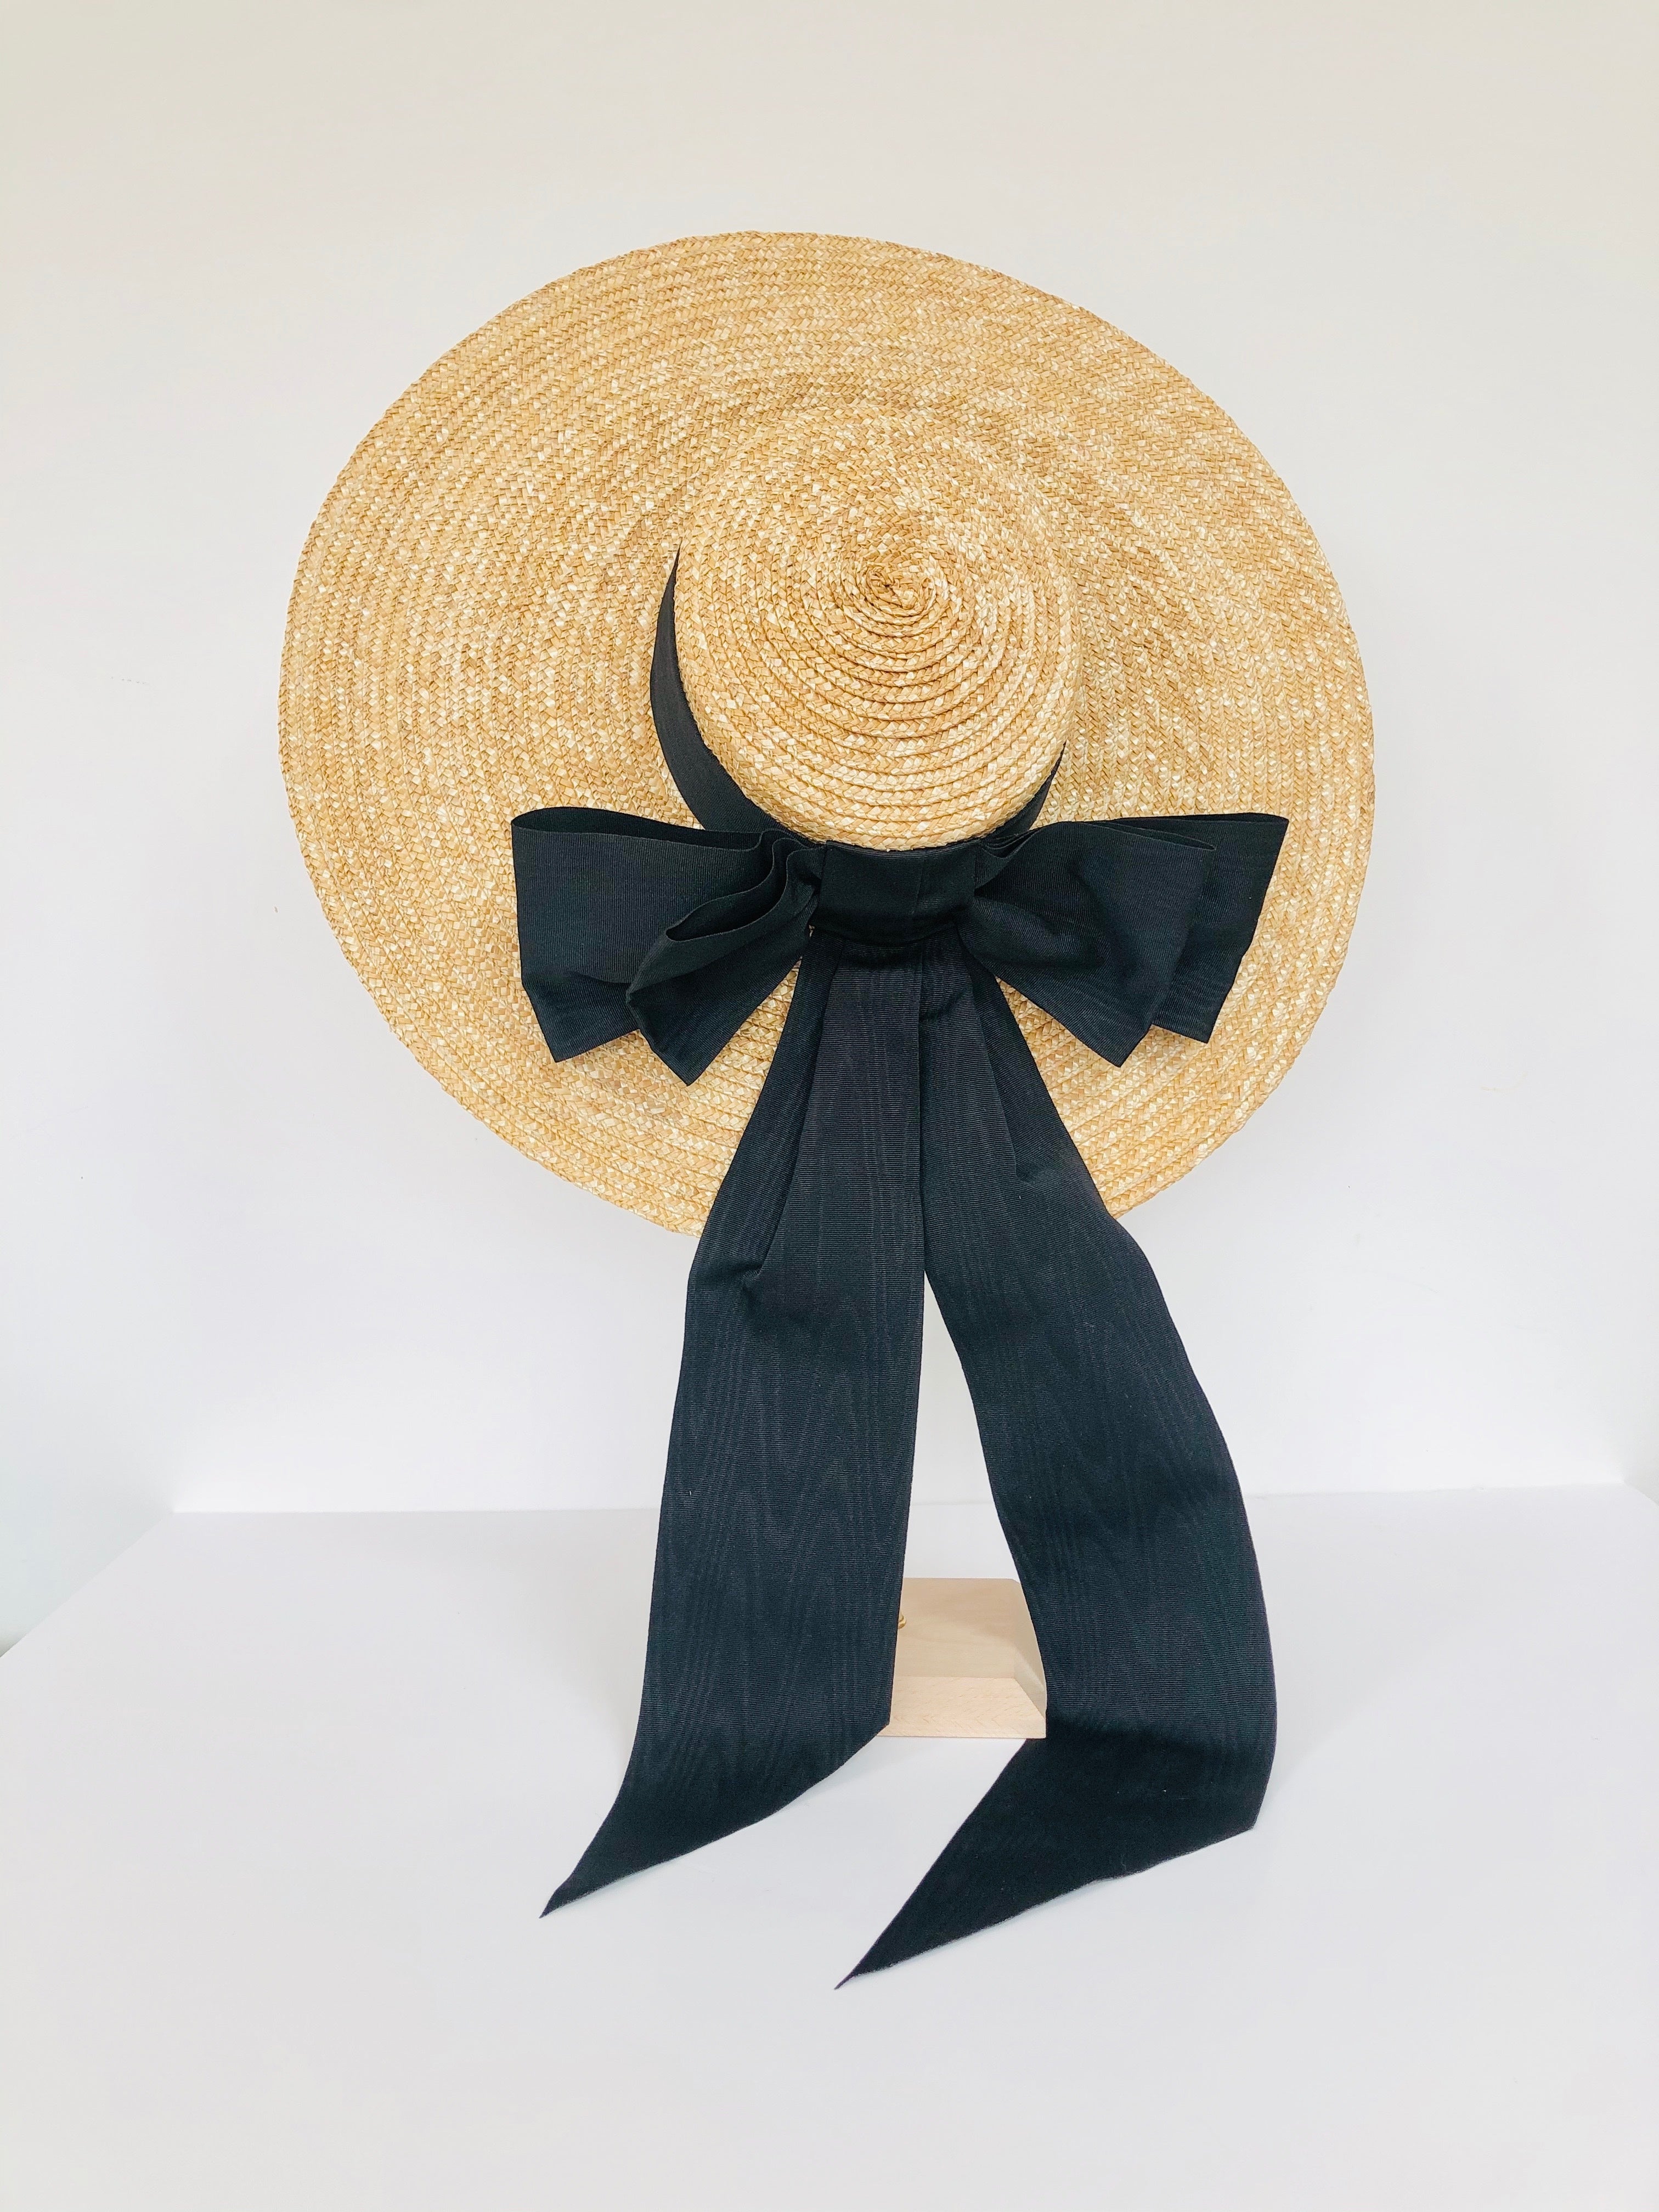 oversized natural straw extra large boater hat with large black moire ribbon bow with long tails